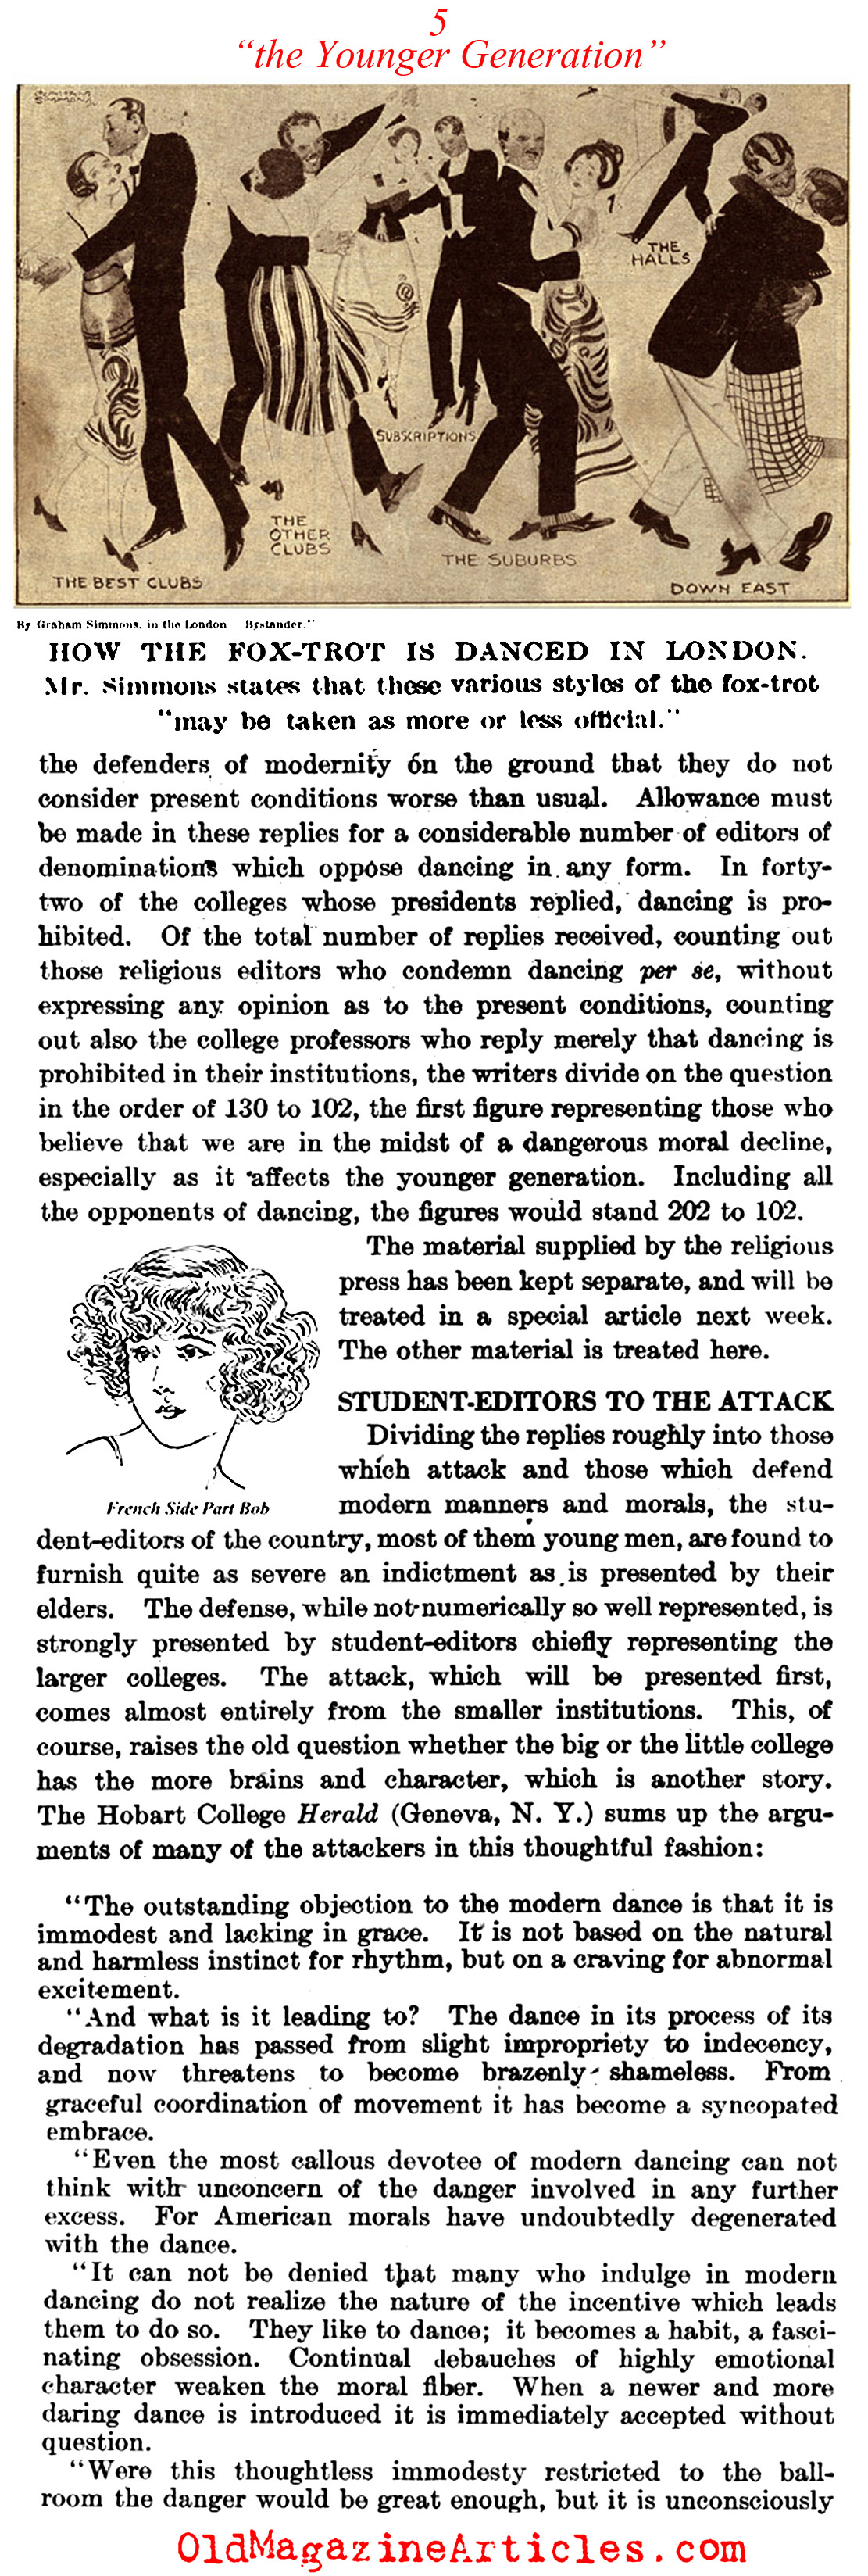 ''Is the Younger Generation in Peril?'' (Literary Digest, 1921)